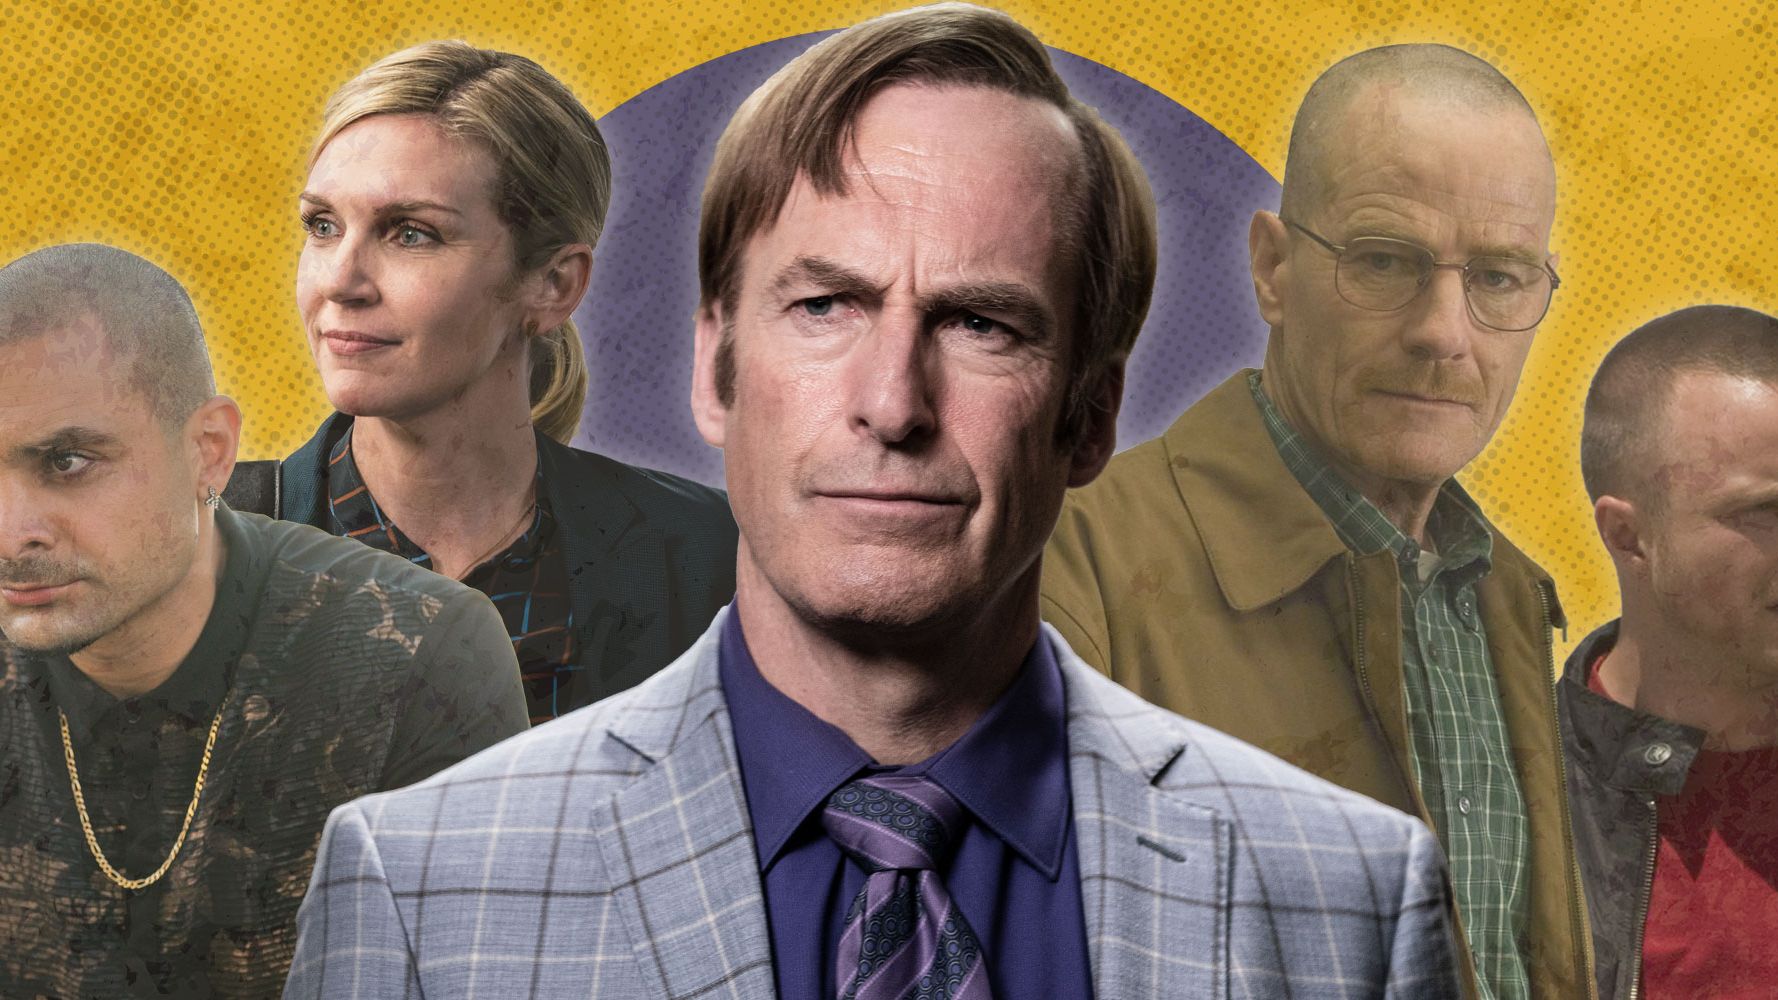 Better Call Saul Goes to Work to Dream the American Dream